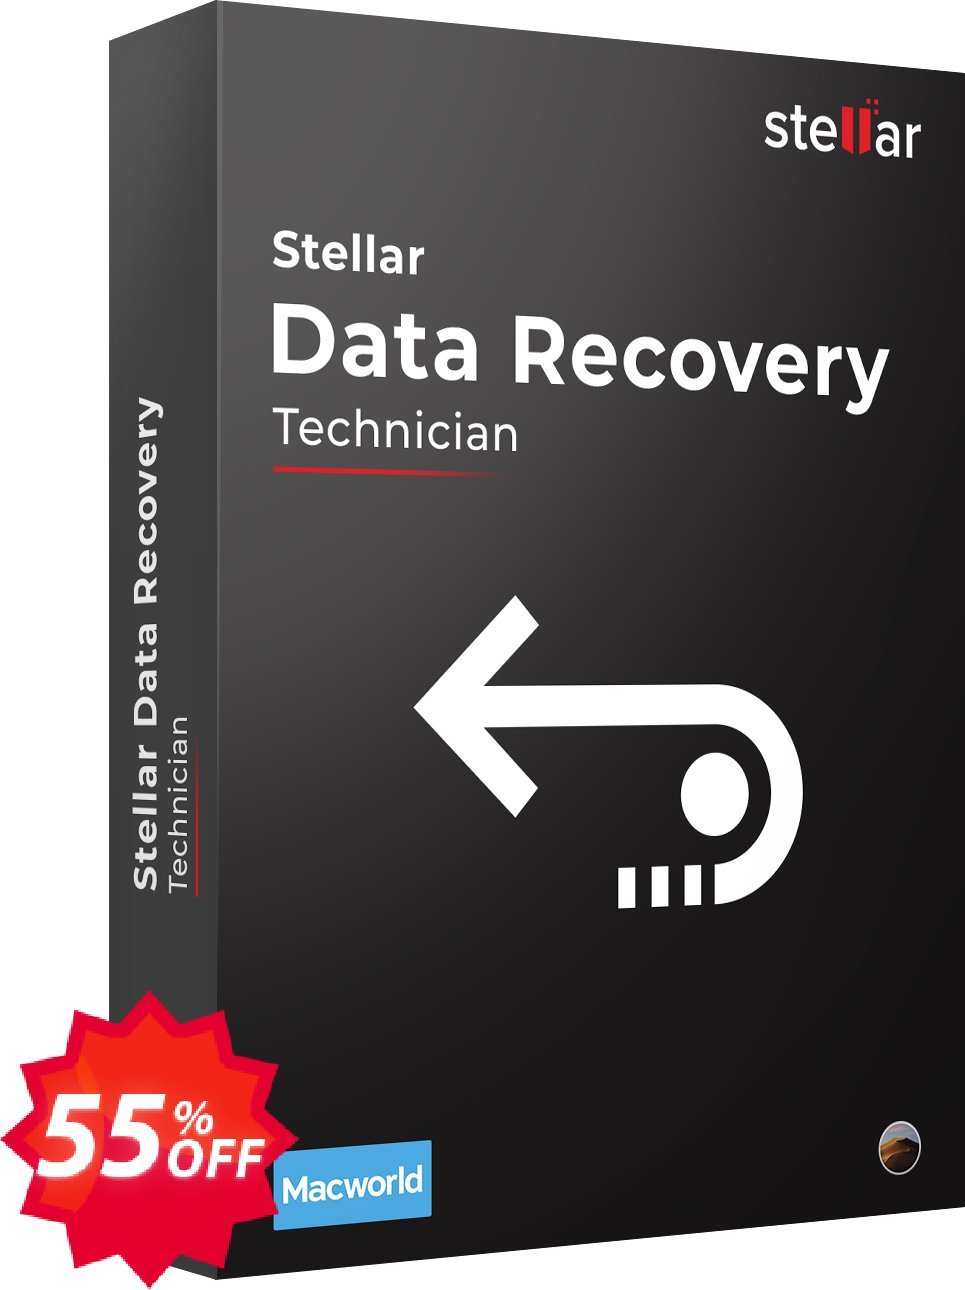 Stellar Data Recovery Technician for MAC Coupon code 55% discount 